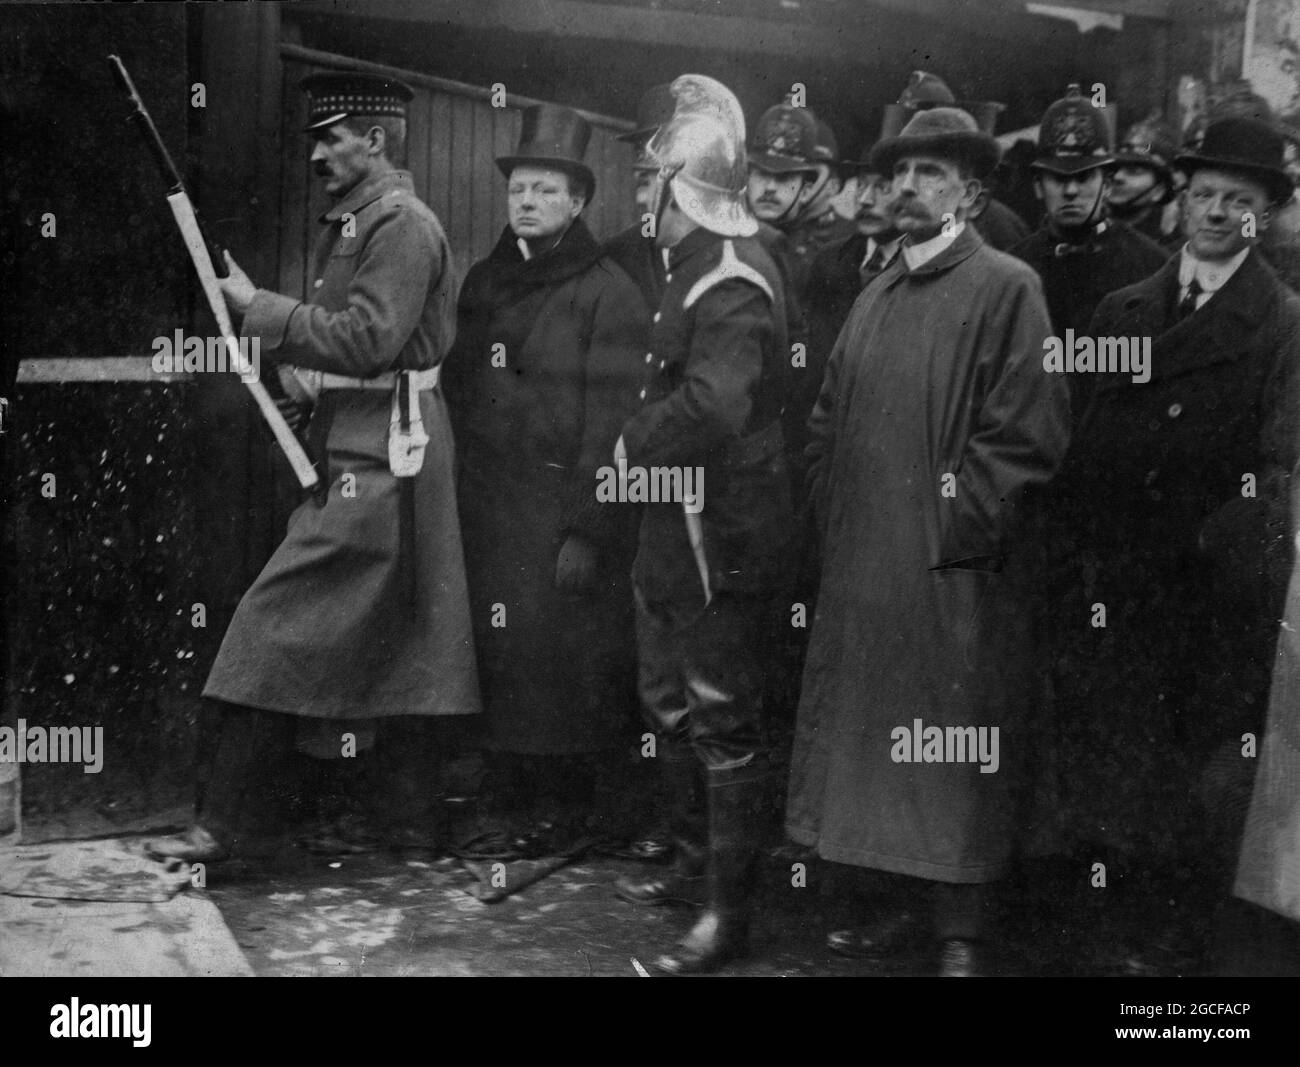 LONDON, ENGLAND, UK - 07 January 1911 - The Siege of Sidney Street of January 1911. The original caption reads: 'The home secretary during the fight: Stock Photo